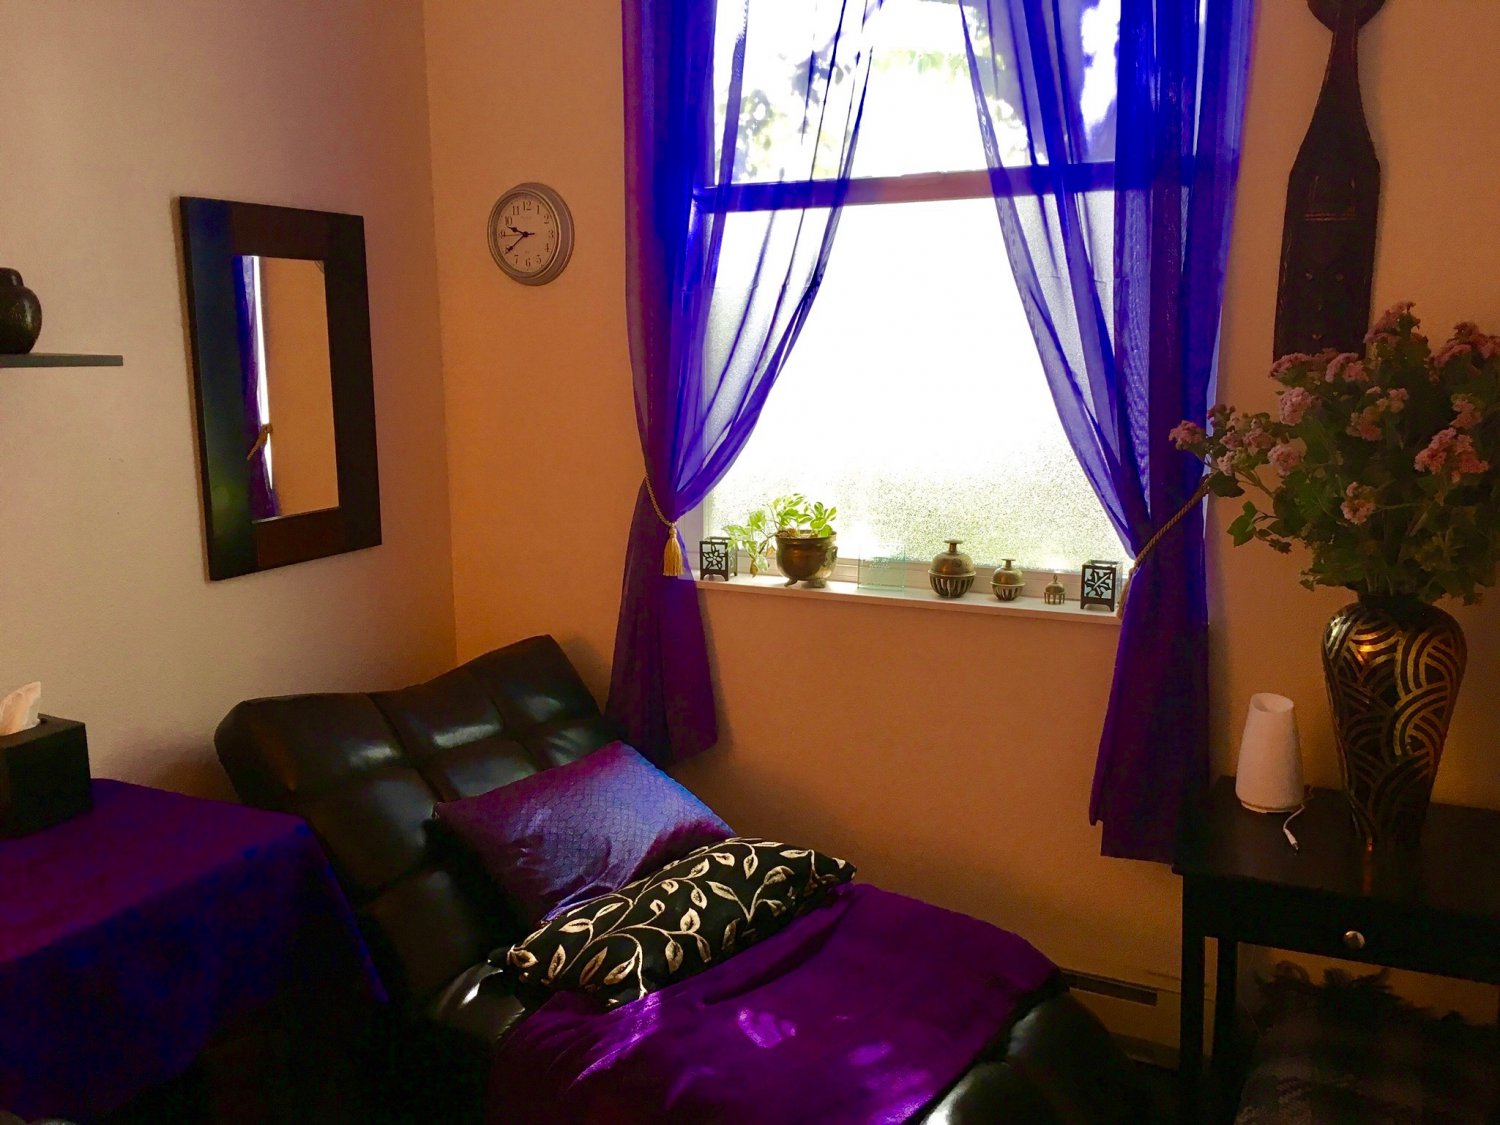 Personal Hypnotherapy Office or Virtual Session